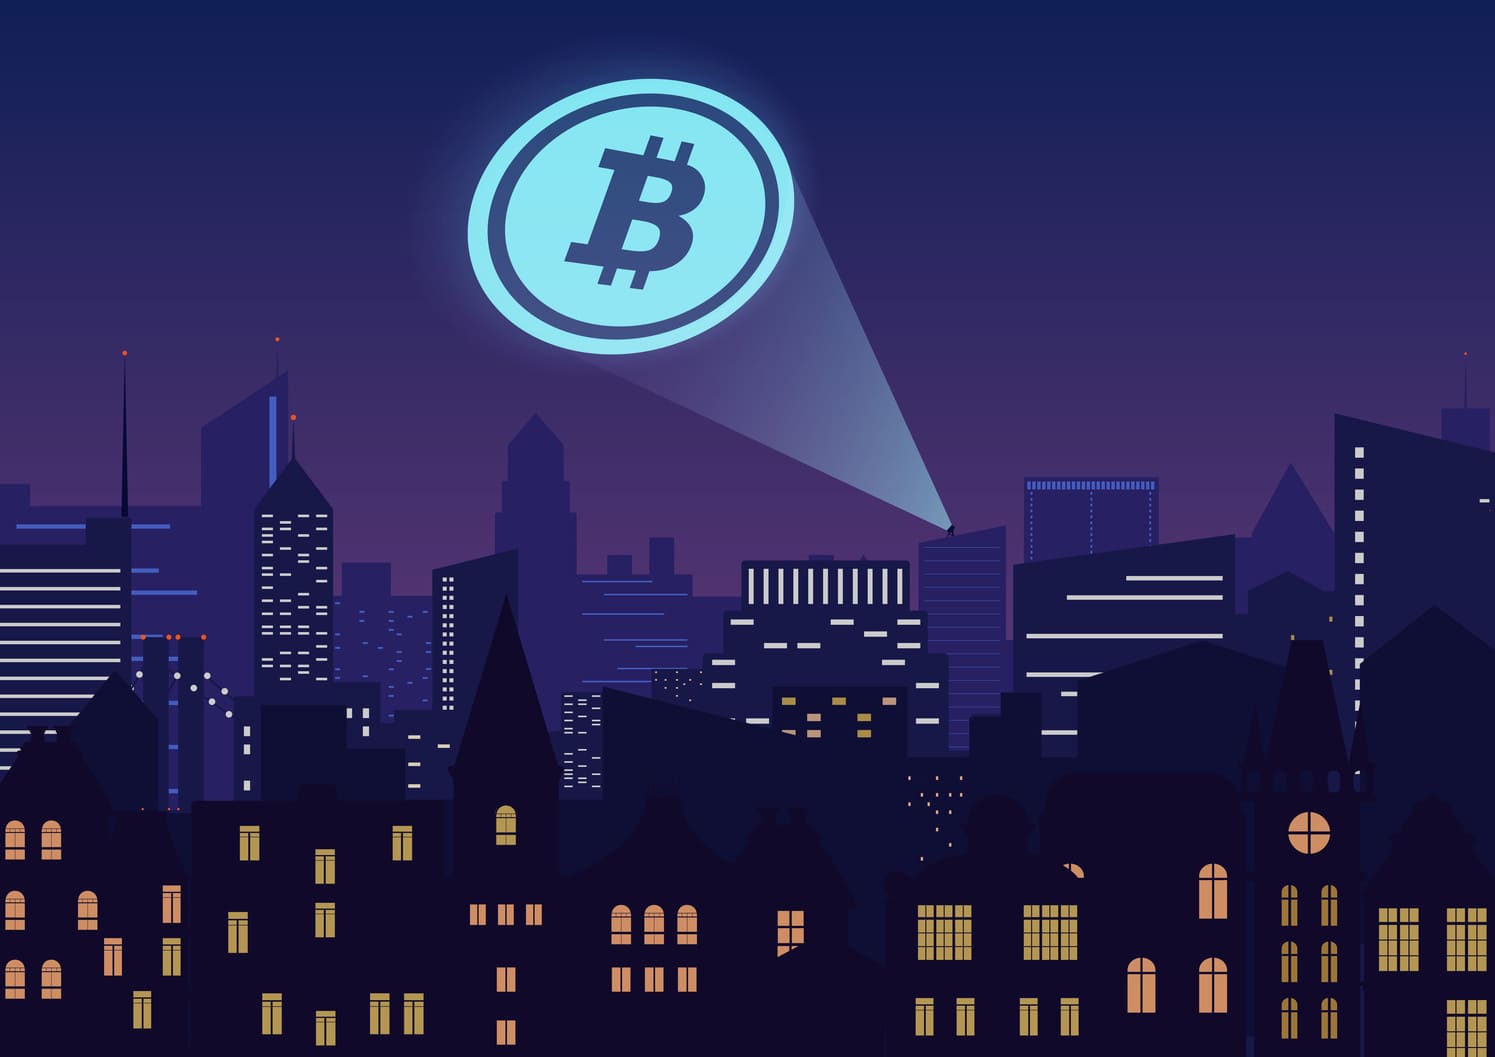 Building Bitcoin City will take around ten years, says JAN3 CEO